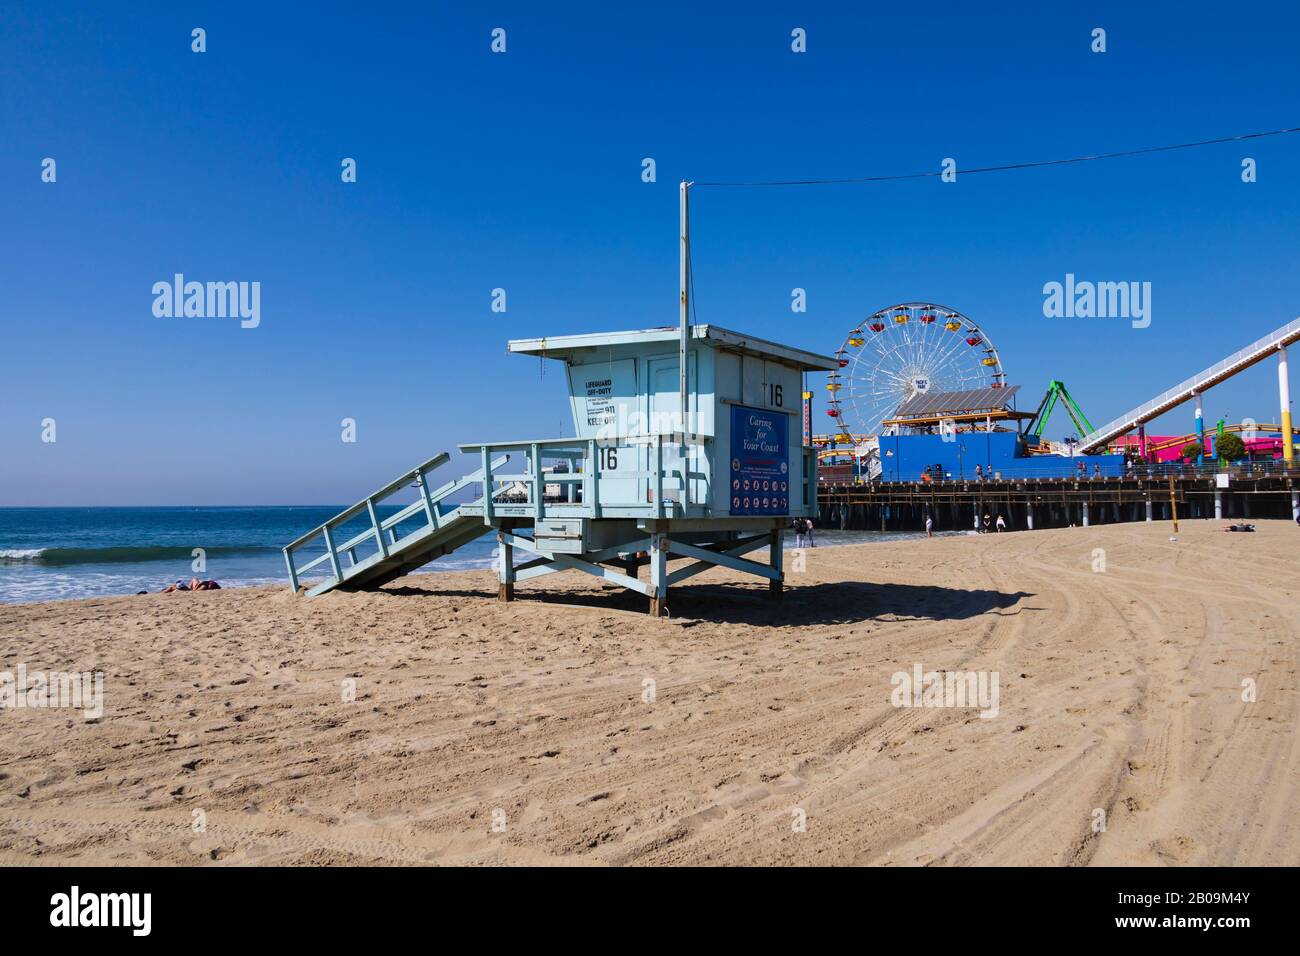 Lifeguard tower and the Santa Monica pier, California, United States of America Stock Photo